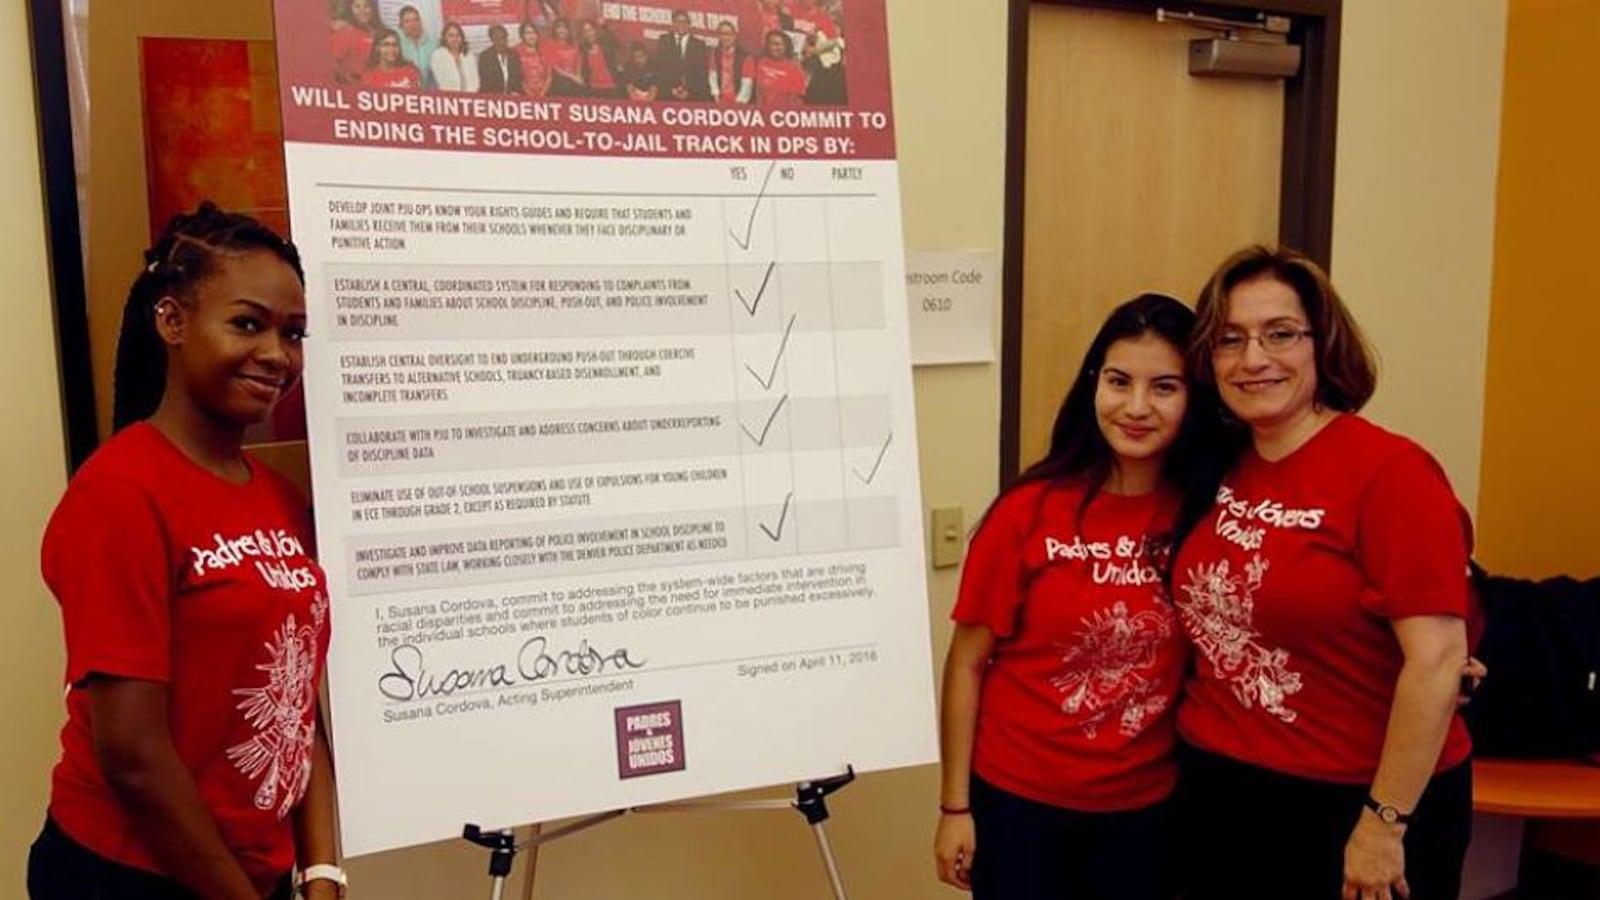 DPS acting superintendent Susana Cordova signed on to several proposed school discipline solutions Monday.  Here, she poses with students Jaquikeyah Fields and Patricia Cardenas.